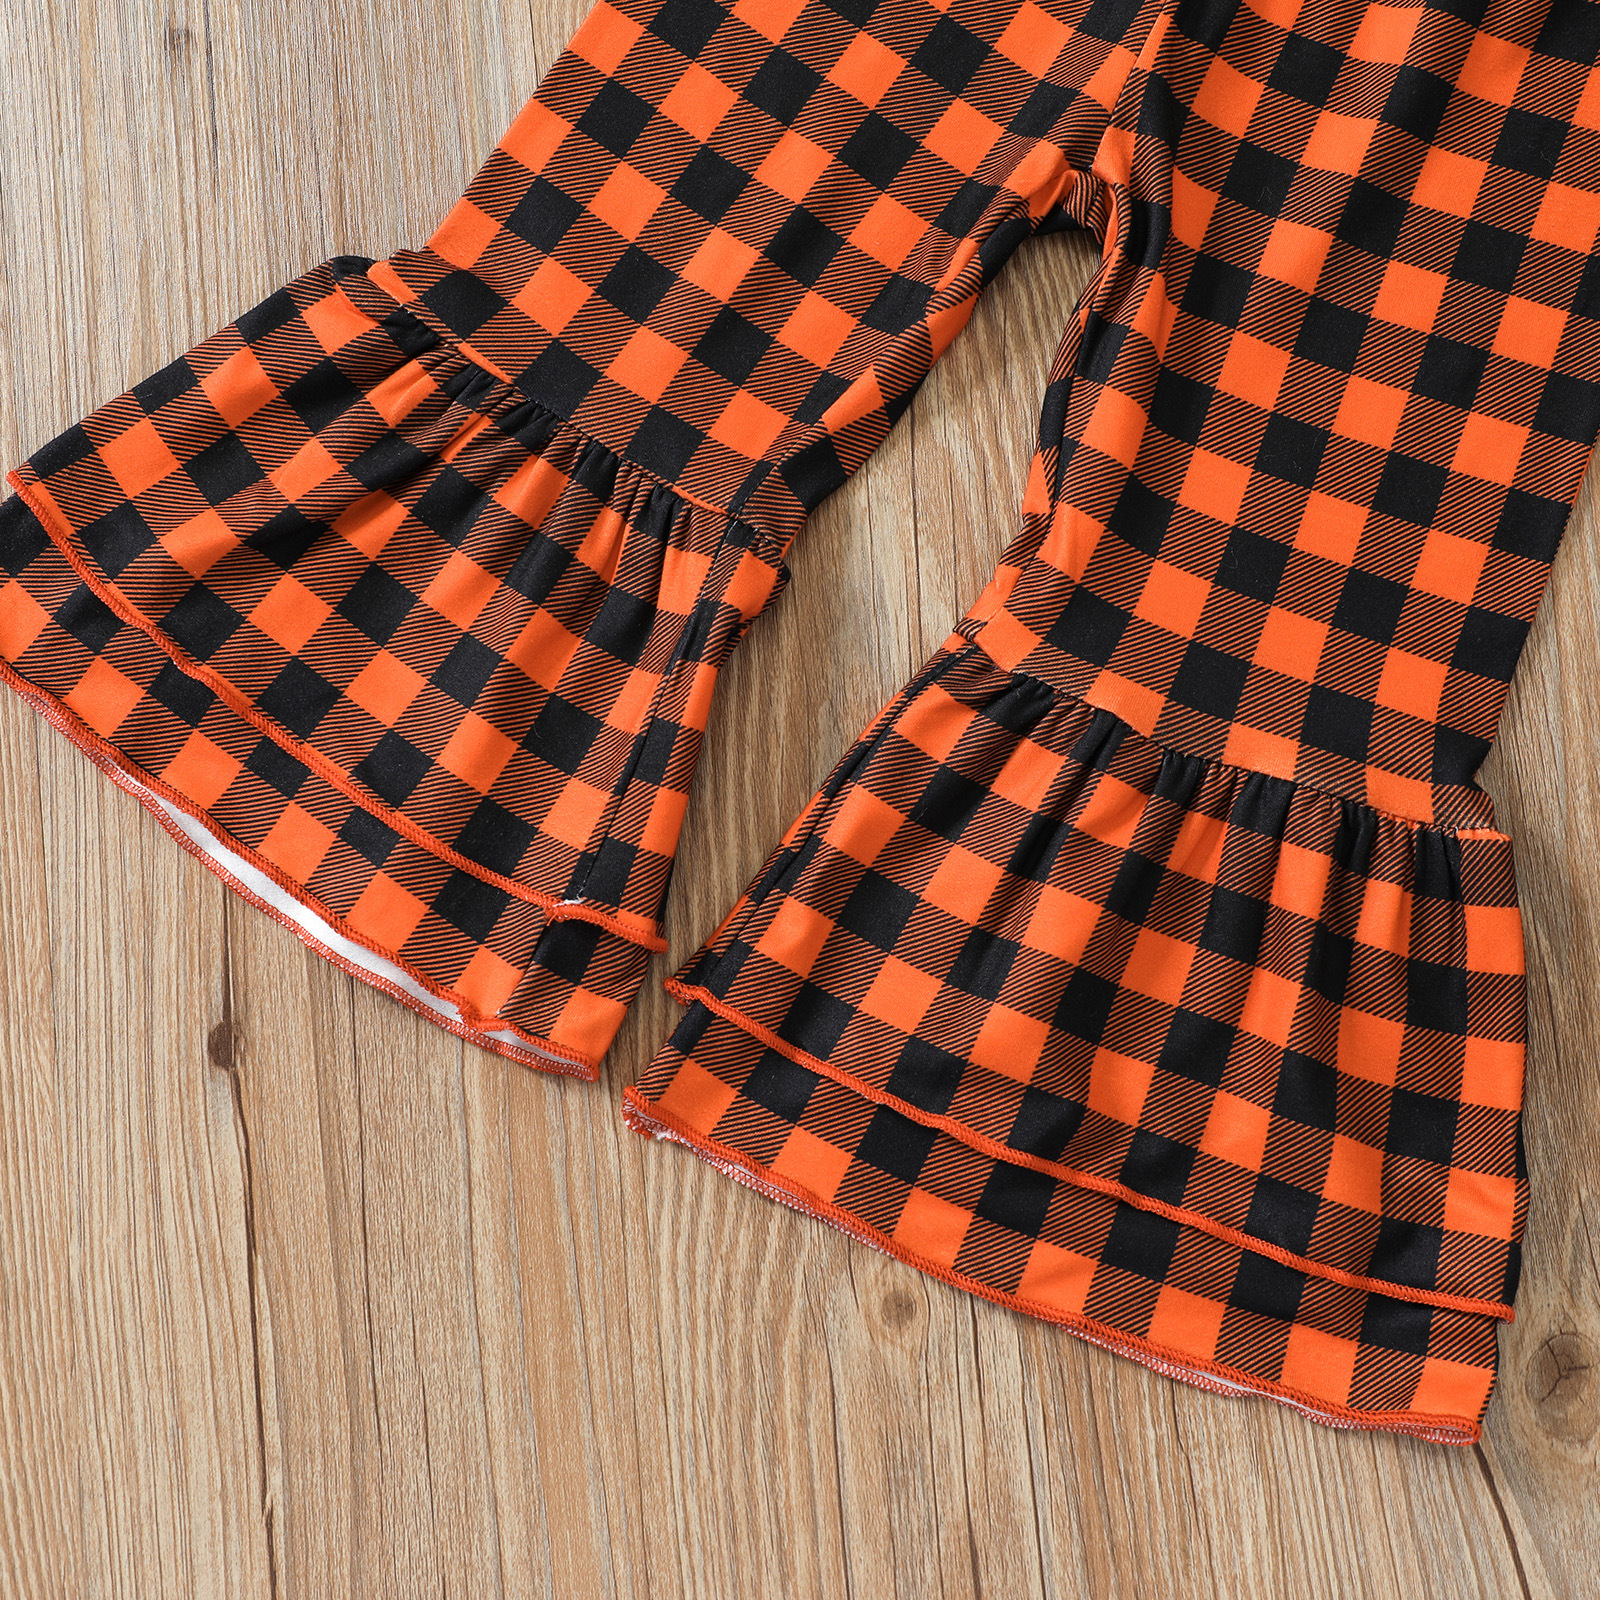 Autumn And Winter Children's Clothing Halloween Pumpkin Plaid Flared Pants Amazon Two-piece Set European And American Letters Girls Suit